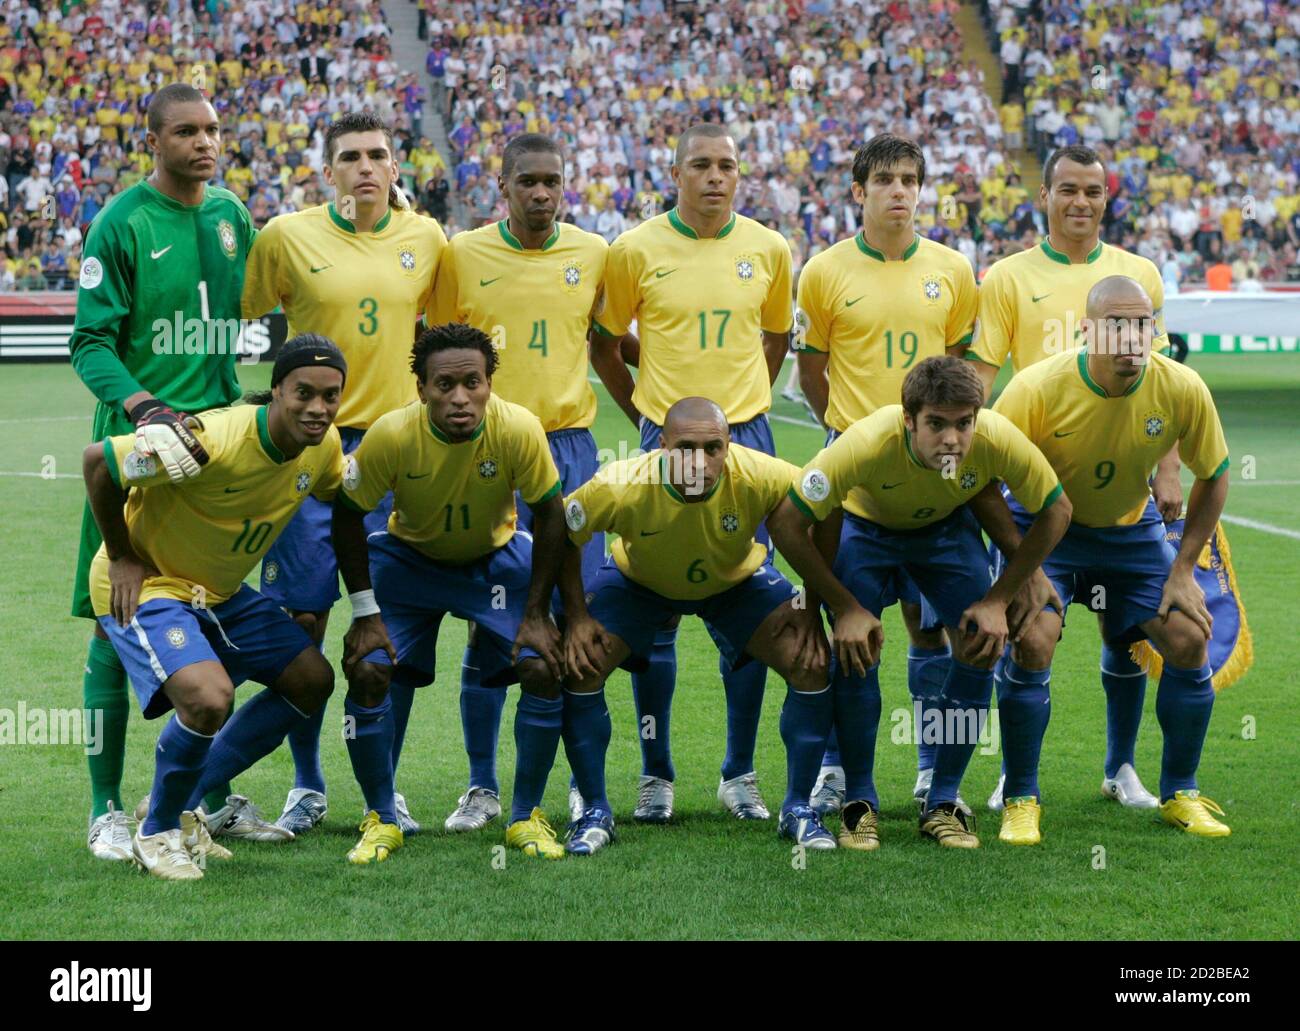 Brazil national soccer team players pose for a team photo before their World  Cup 2006 quarter-final soccer match against France in Frankfurt July 1, 2006.  Front row from left: Ronaldinho, Ze Roberto,